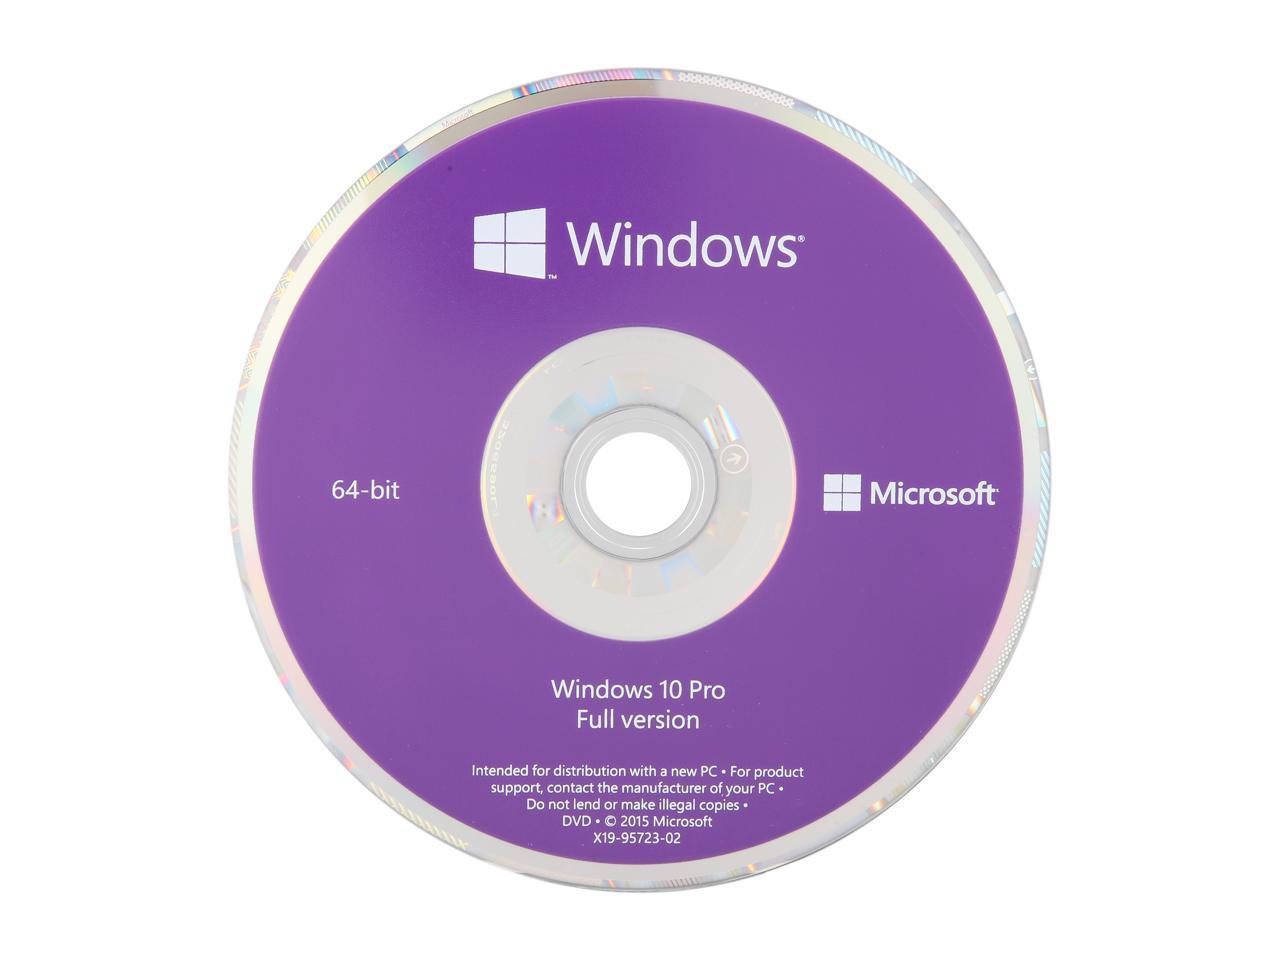 Windows 10 Pro 64-Bit Installation / Recovery Disc Only - No License Key Included